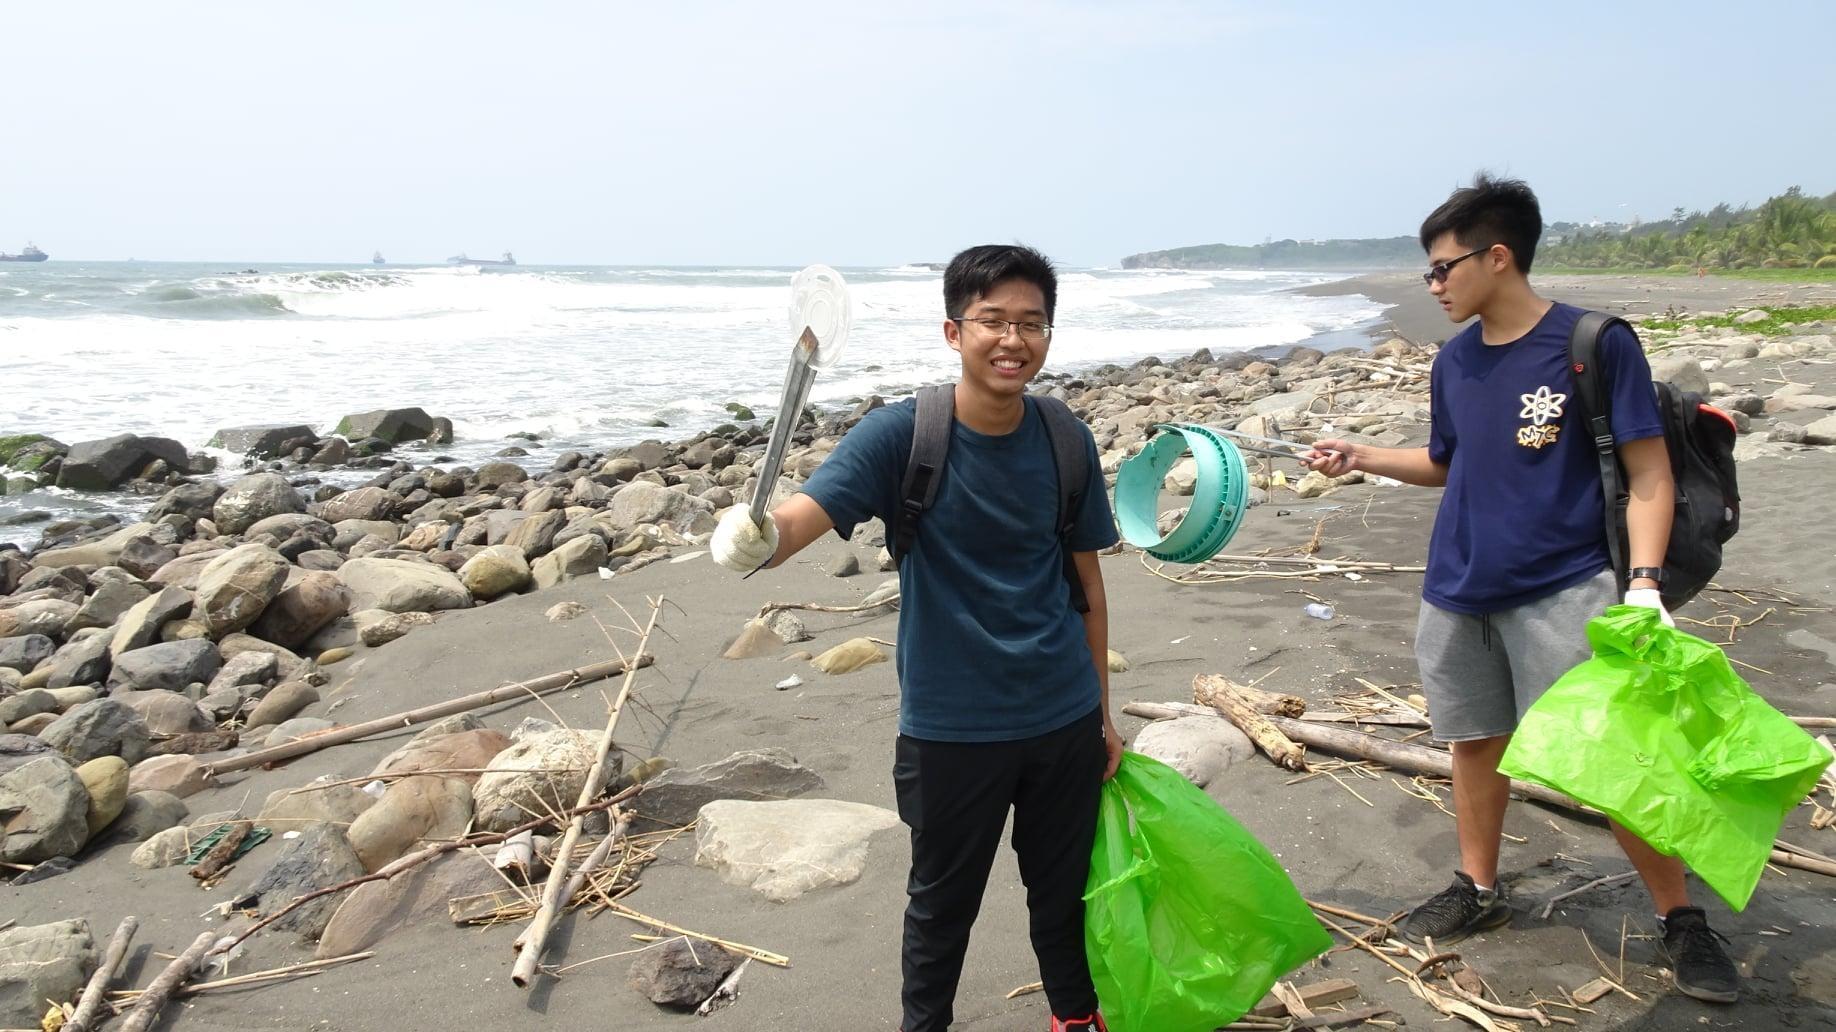 Two students collect trash on the beach.